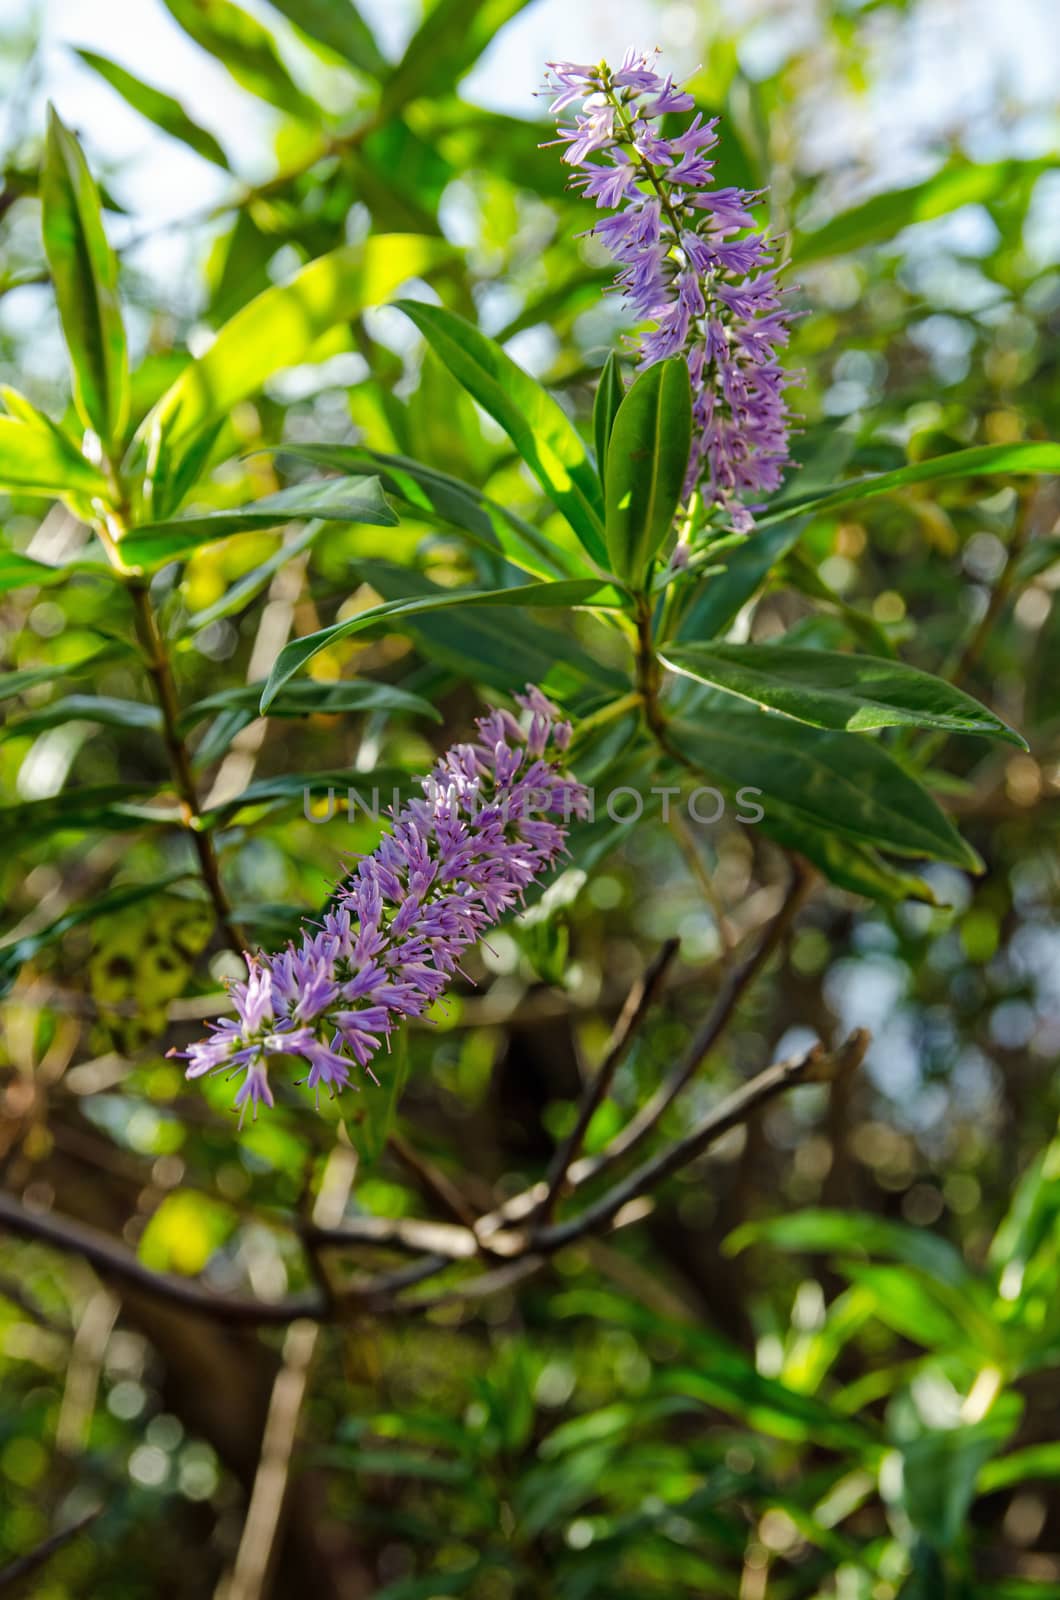 A hebe shrub with purple blooms flowering in the autumn sunshine